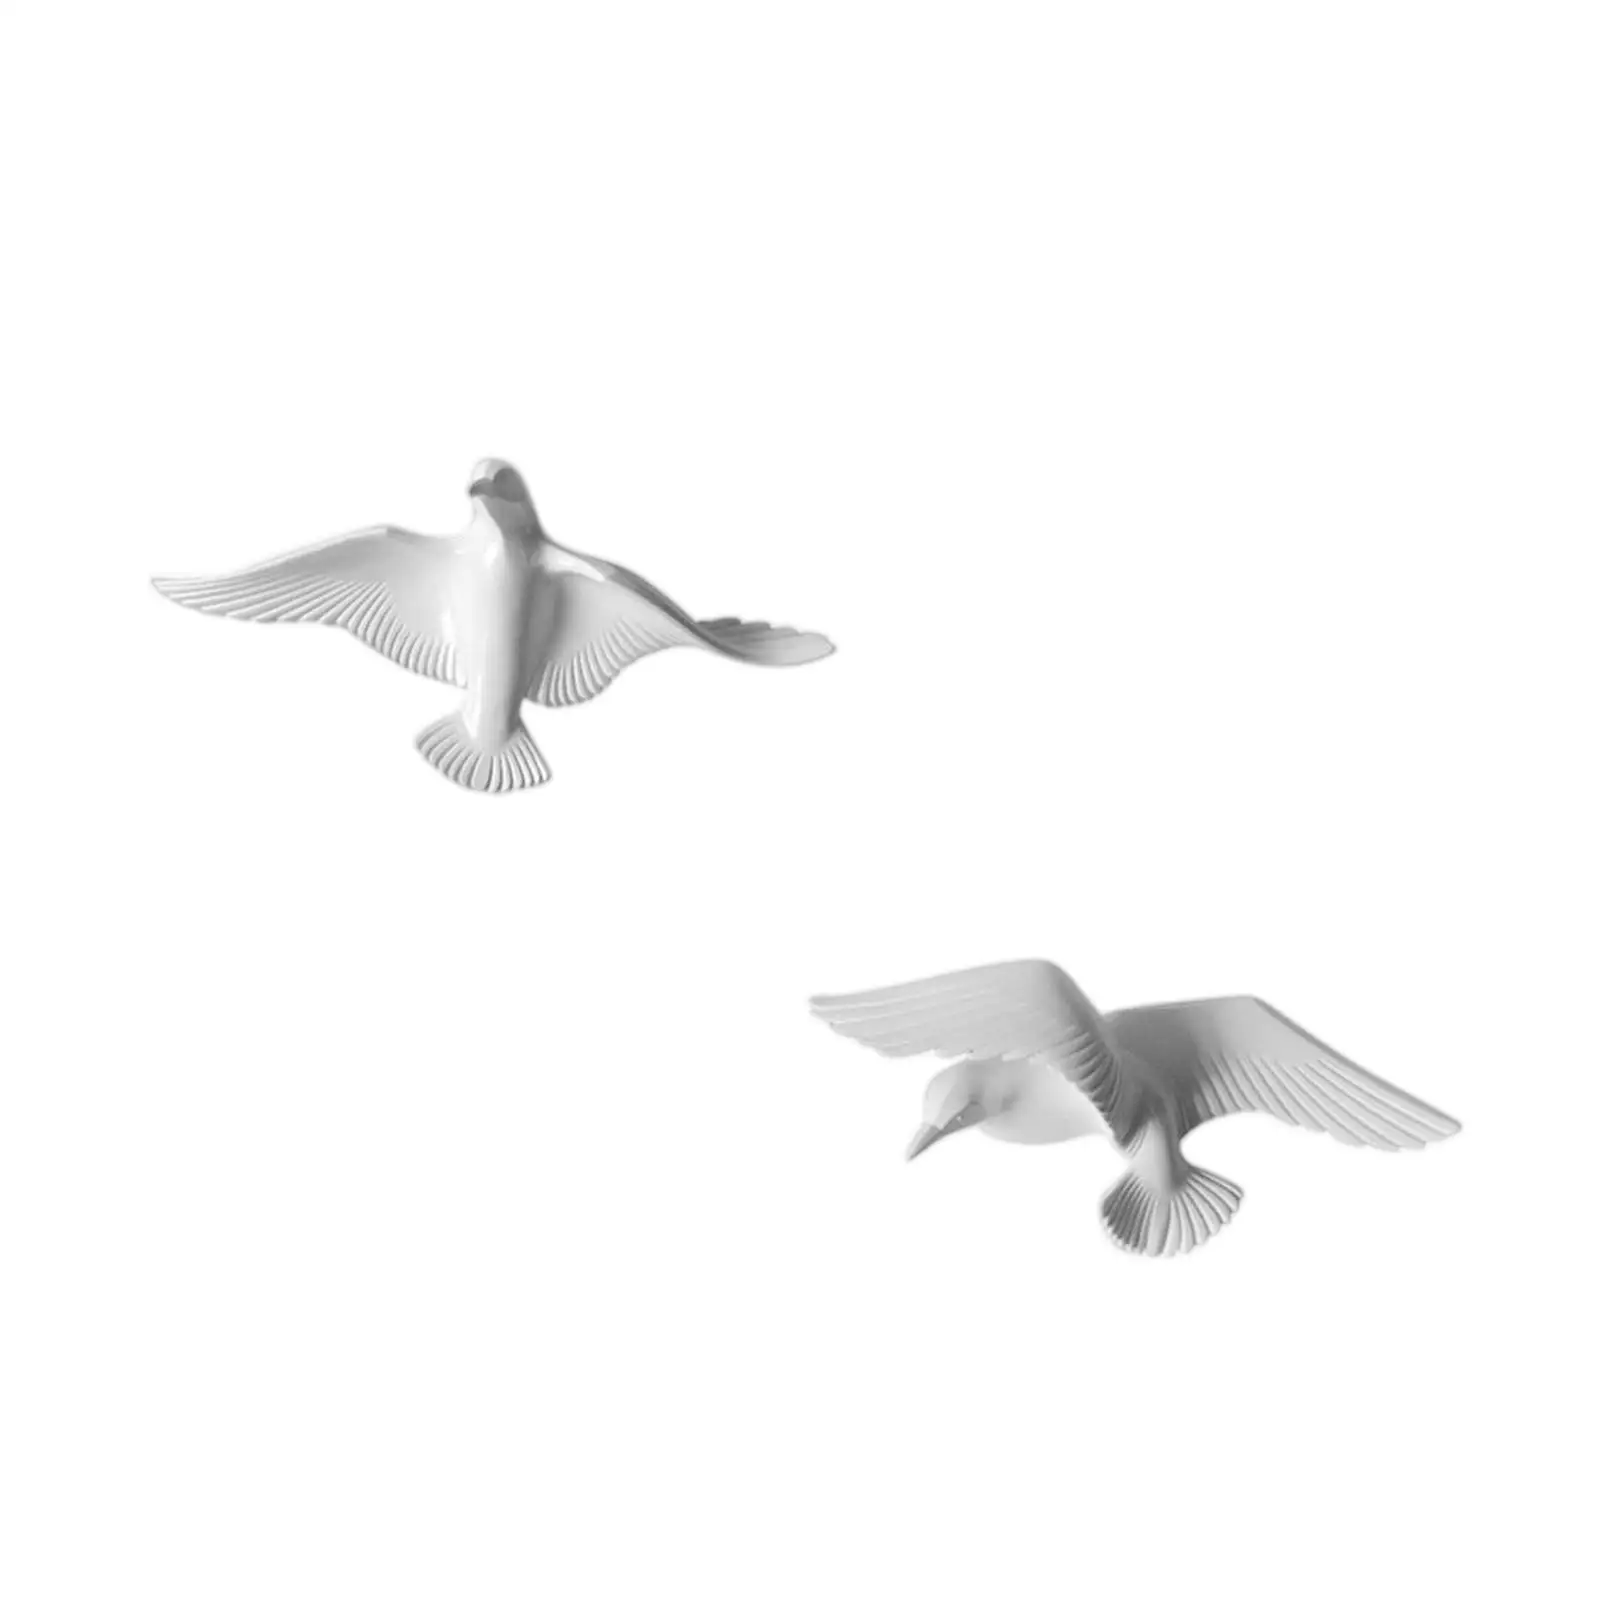 2Pcs Fashion Resin Seagull Living Room Office Wall Decorations